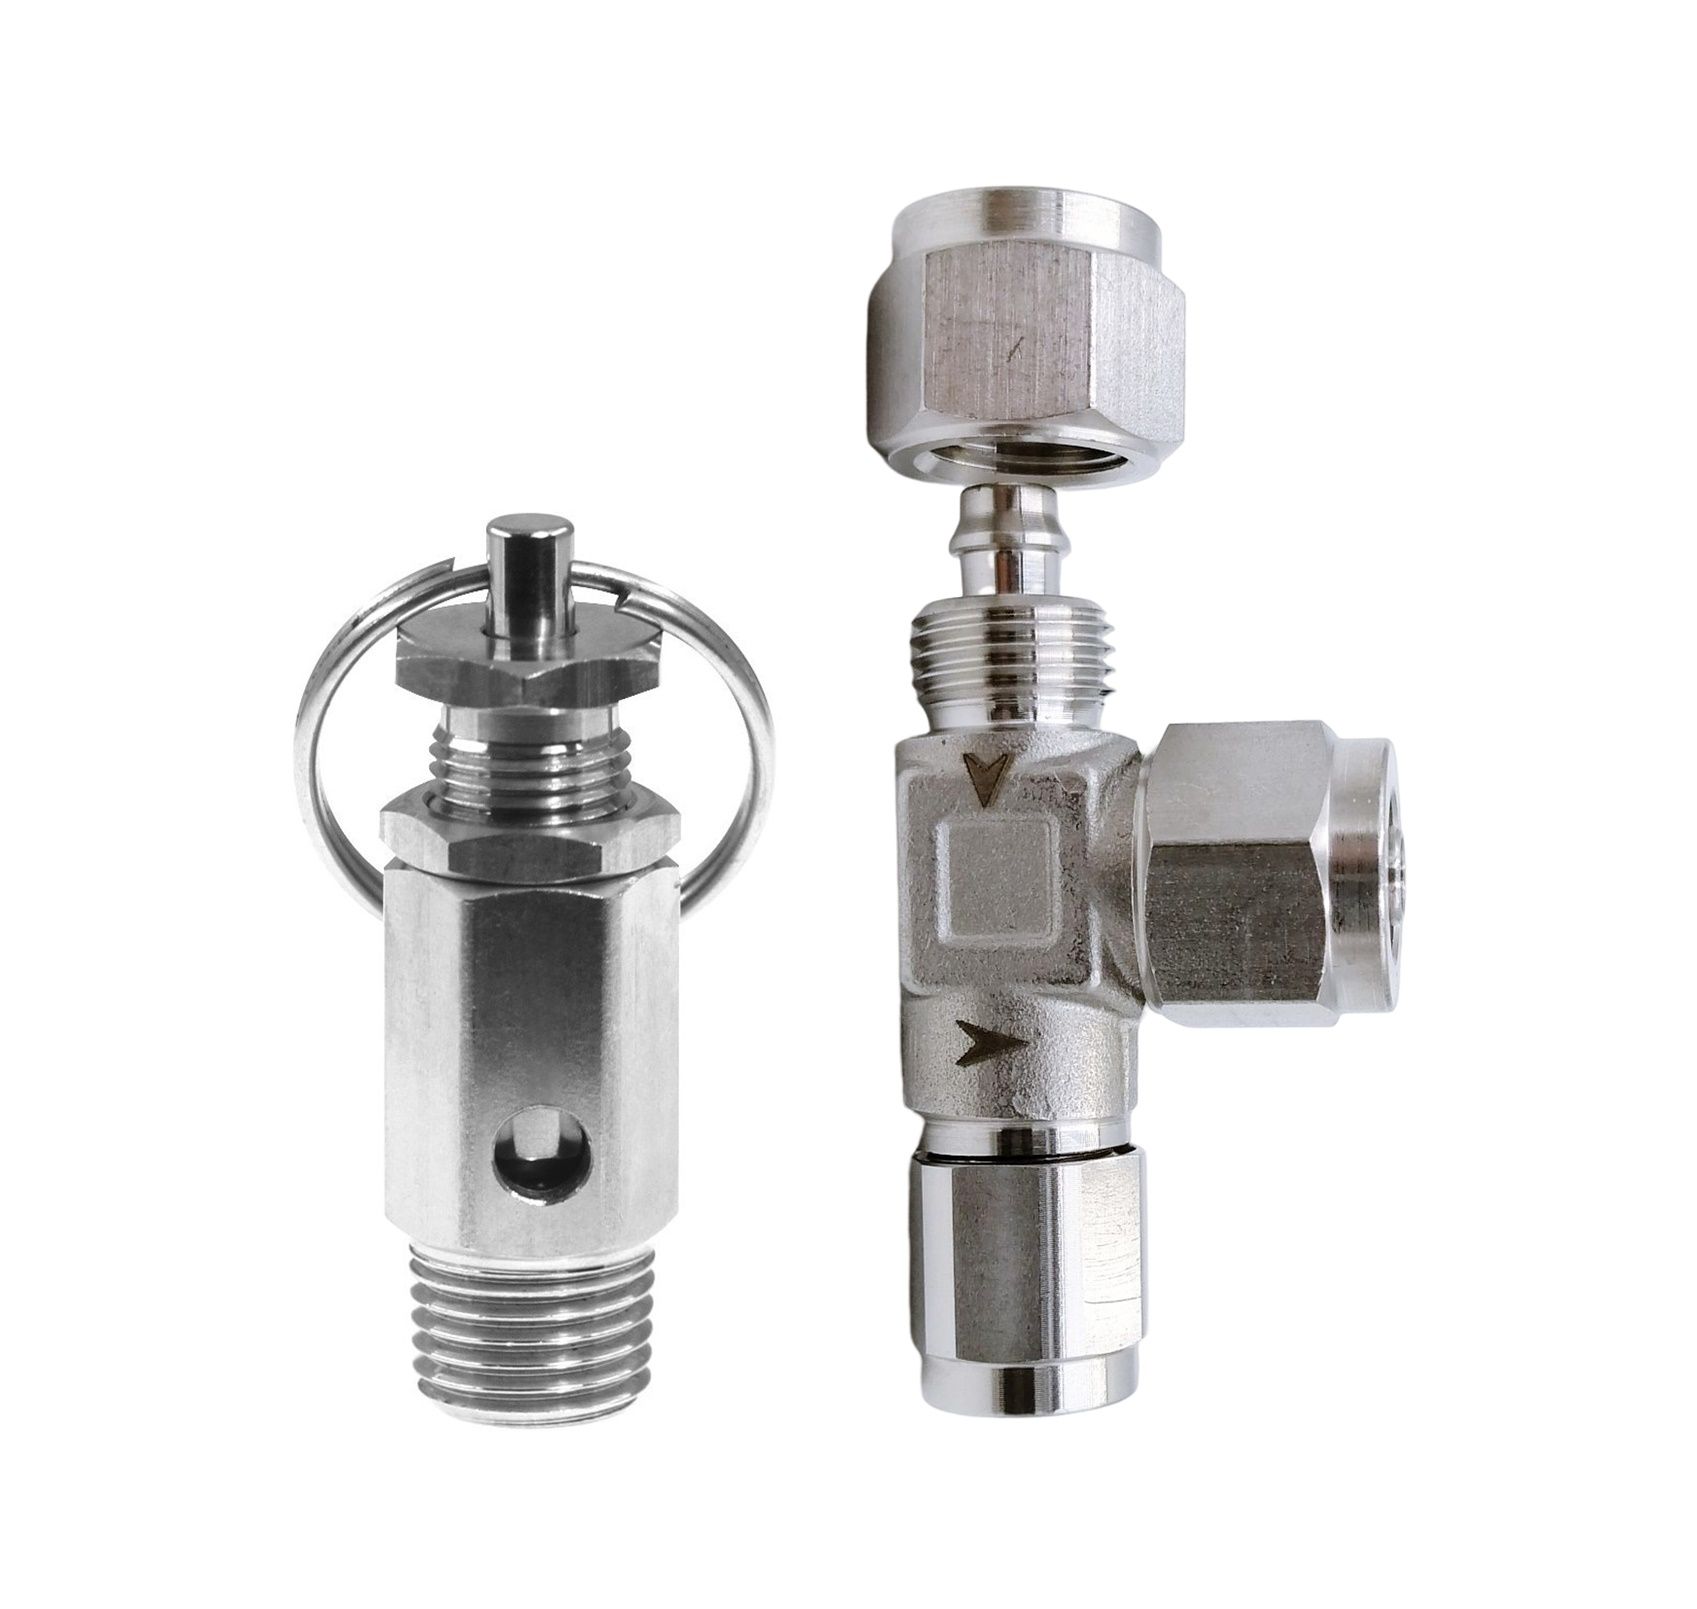 Air compressor safety valve is adjustable for protection of overpressure devices.